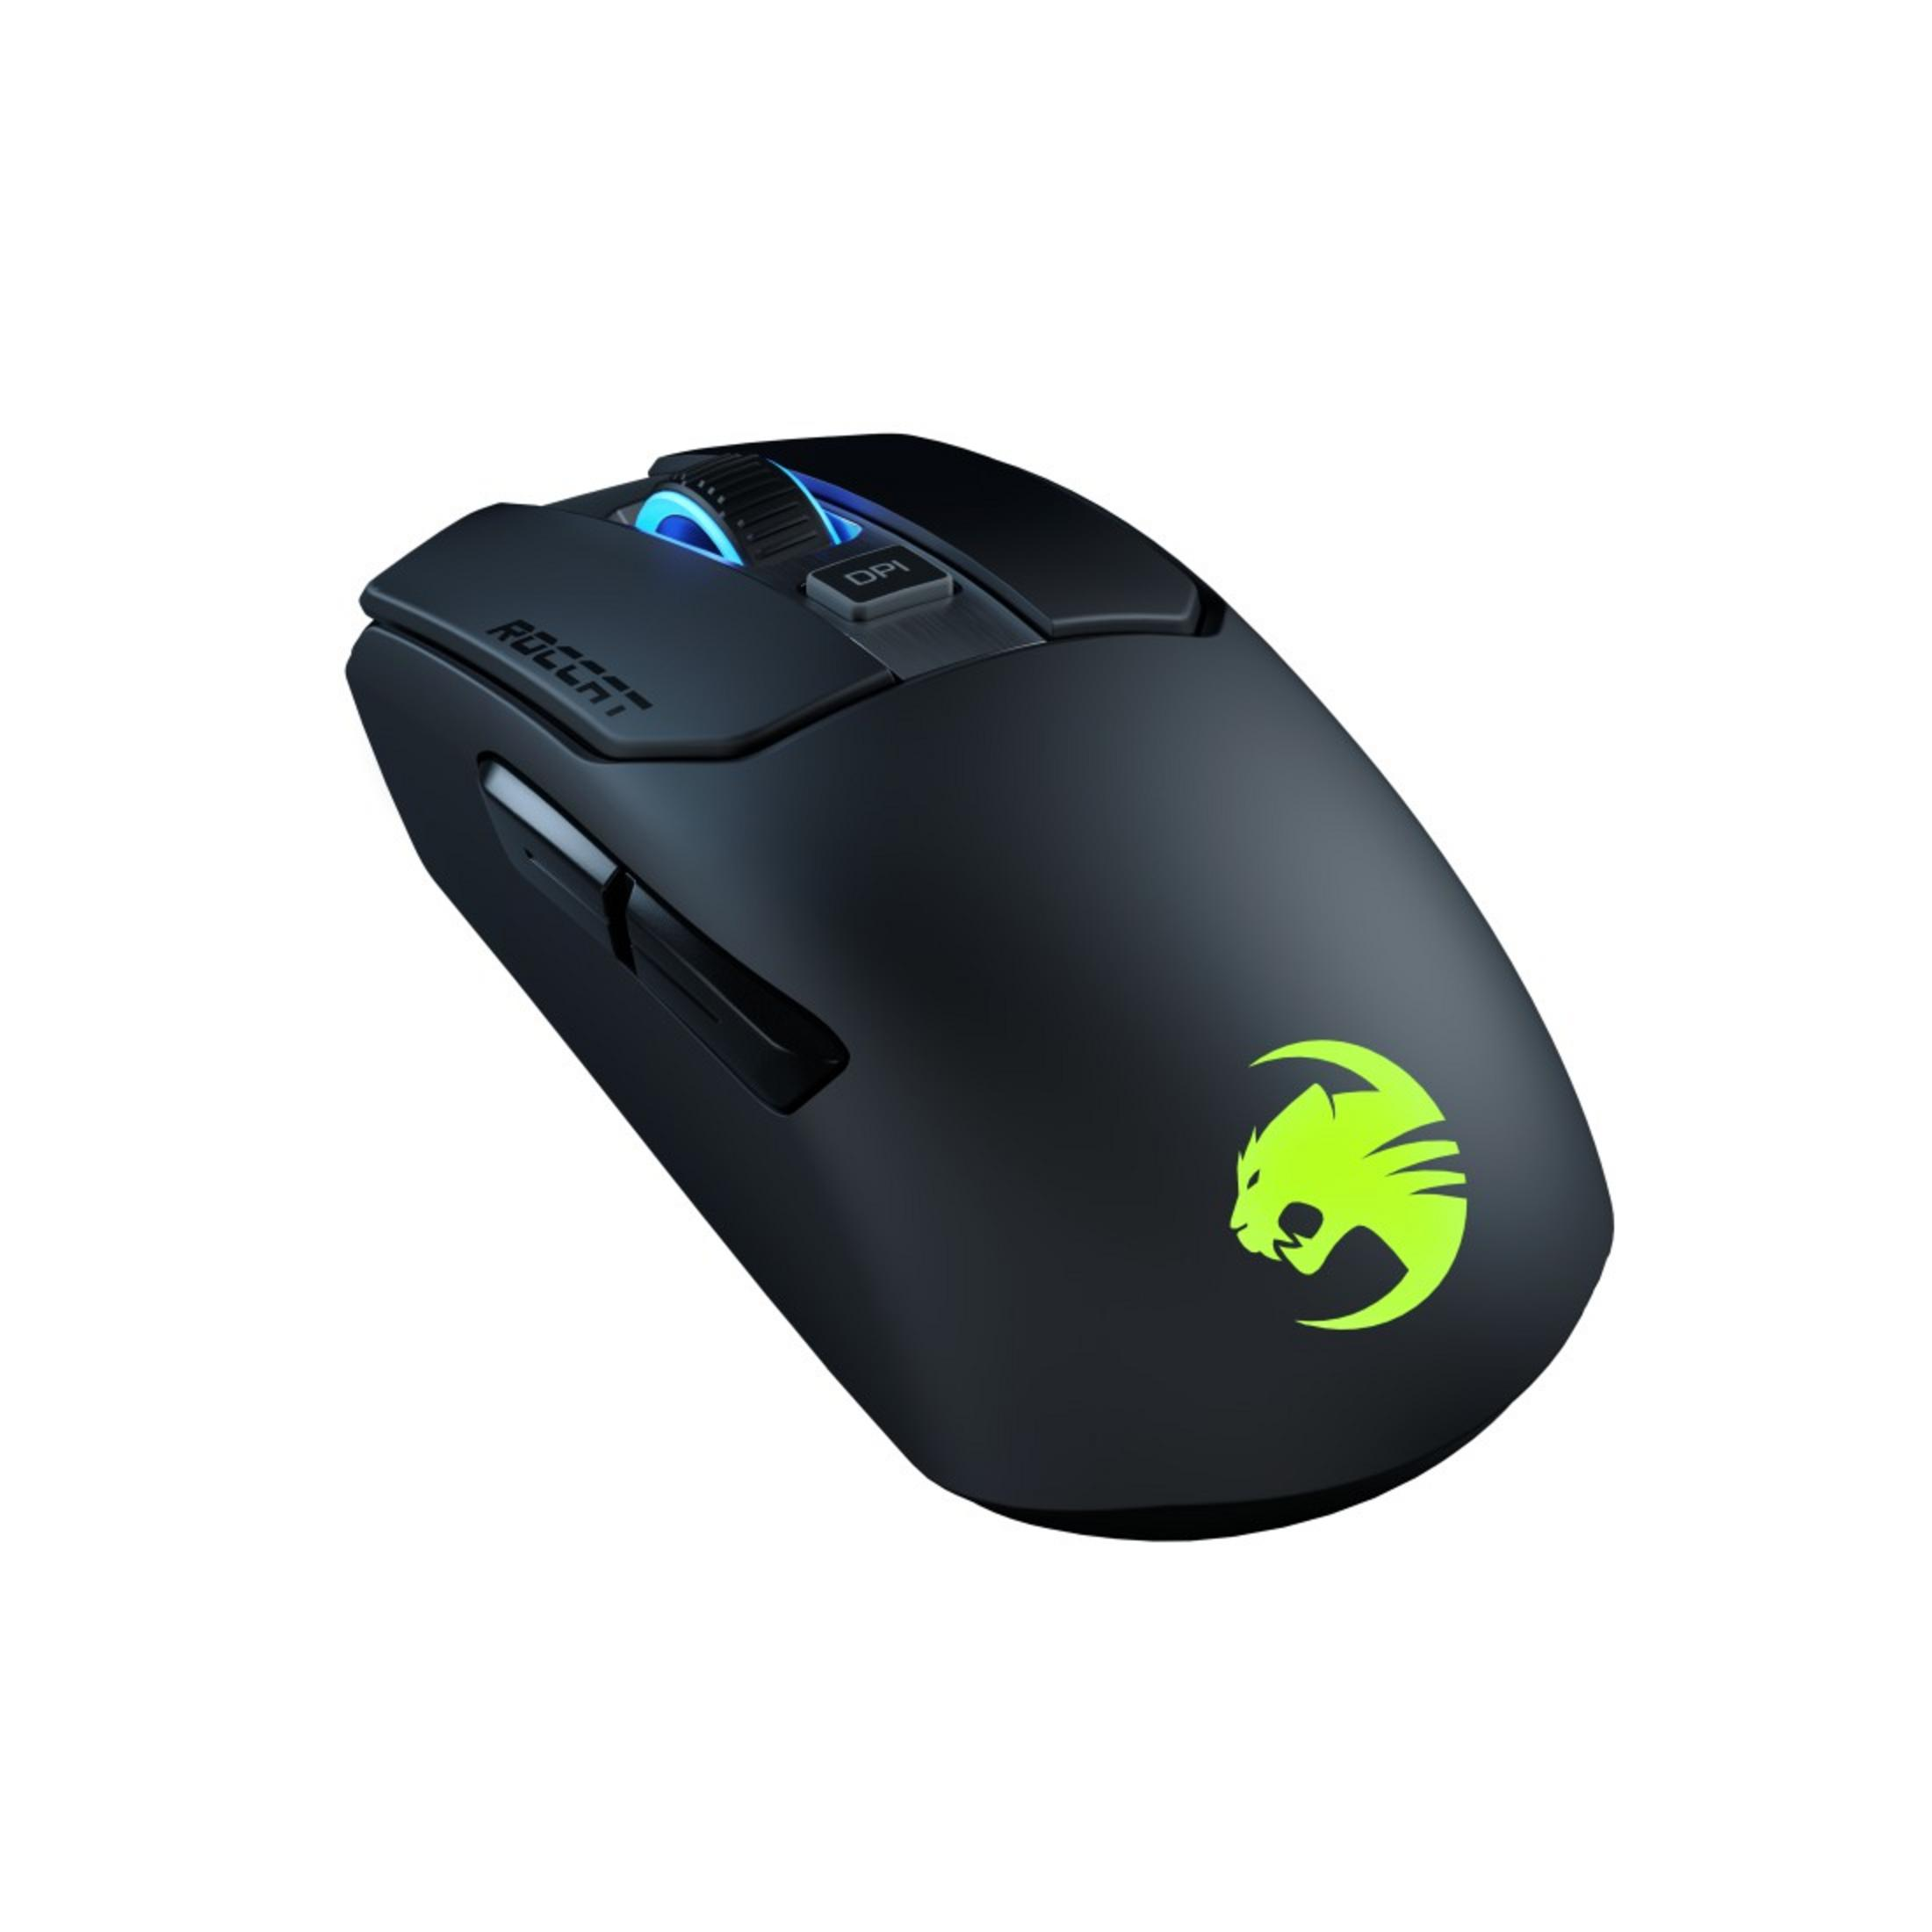 ROCCAT ROC-11-615-BK KAIN Schwarz MOUSE Maus, 200 Gaming AIMO GAMING